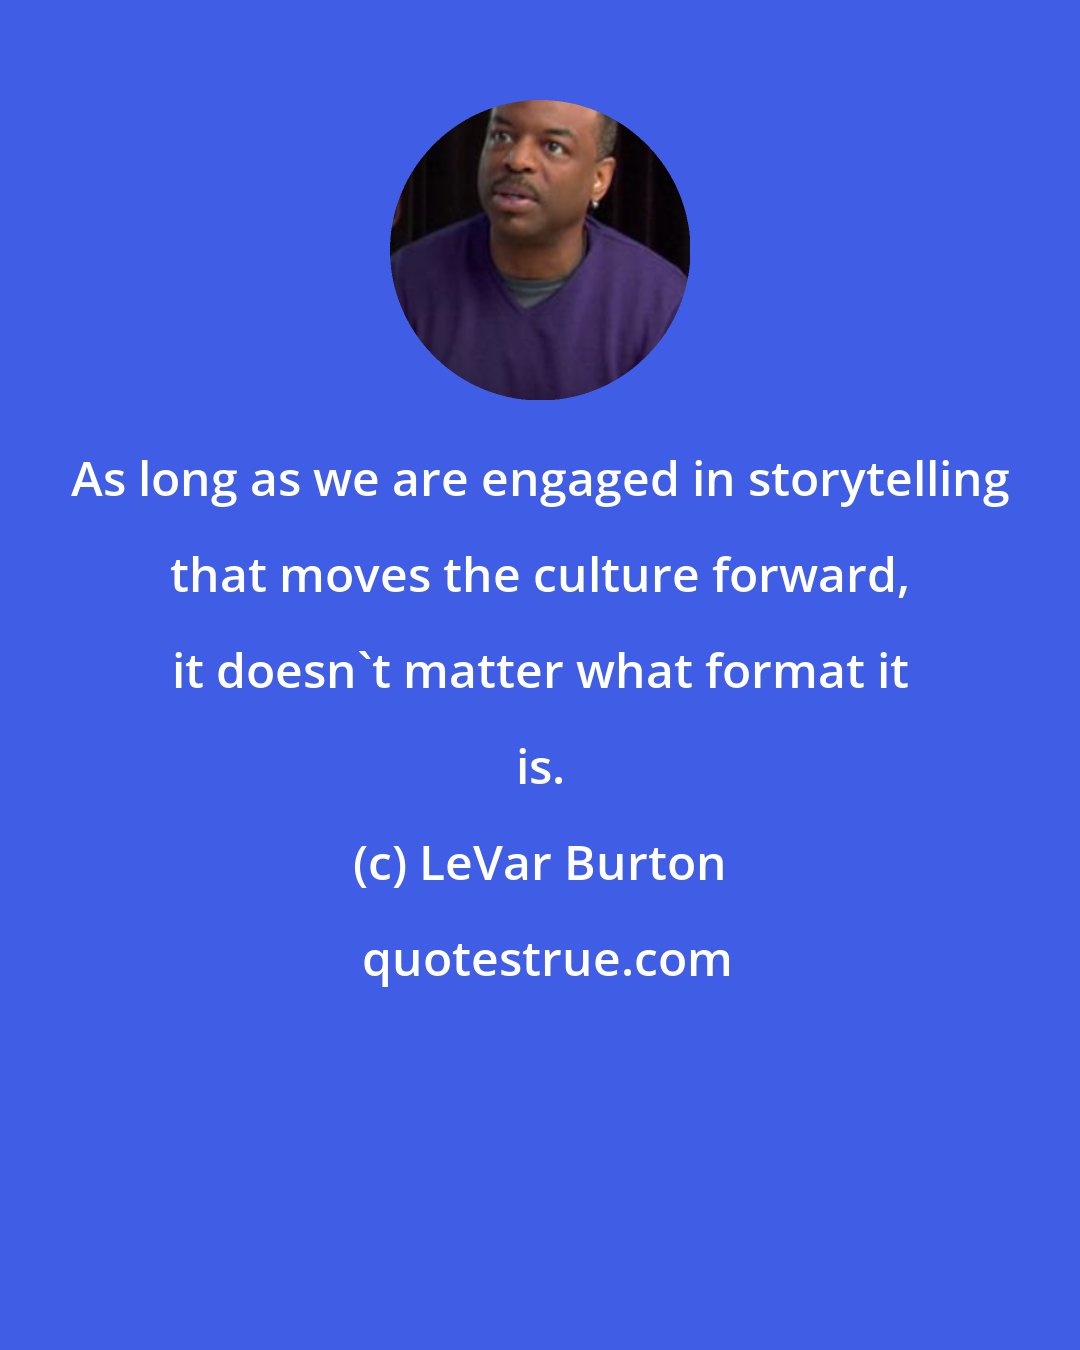 LeVar Burton: As long as we are engaged in storytelling that moves the culture forward, it doesn't matter what format it is.